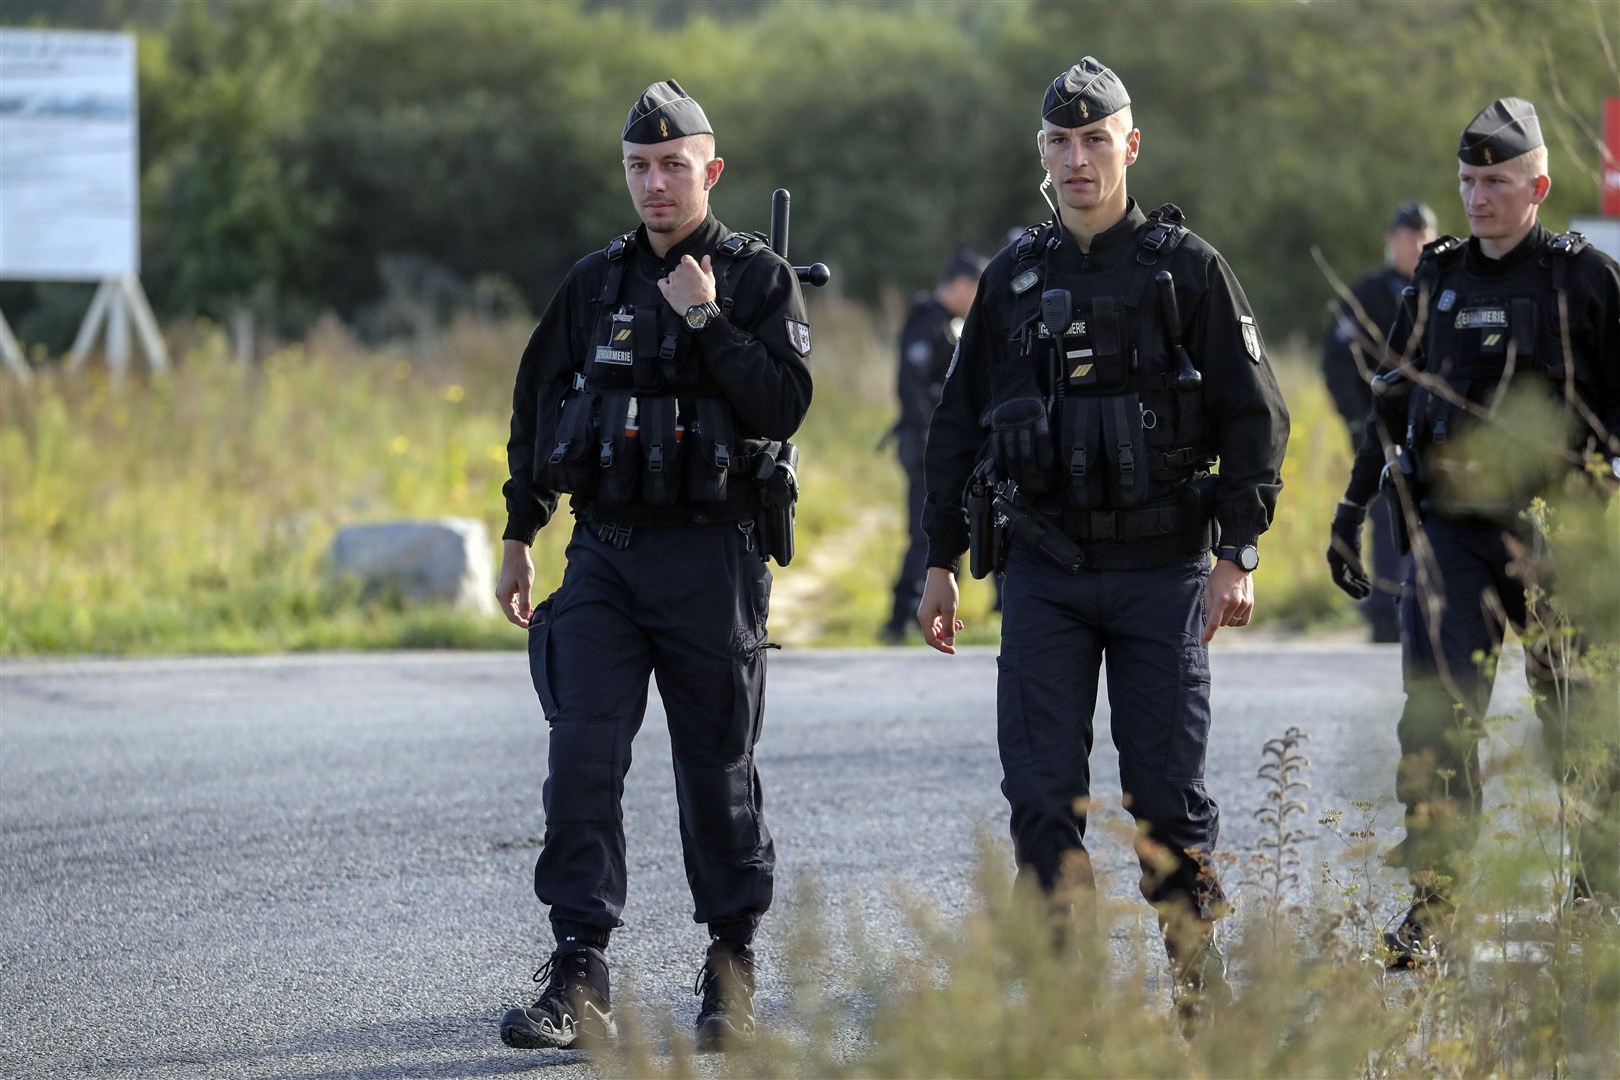 The Intervention Group of the National Gendarmerie tactical unit was called and a negotiator persuaded the couple to give themselves up (Steve Parsons/PA)